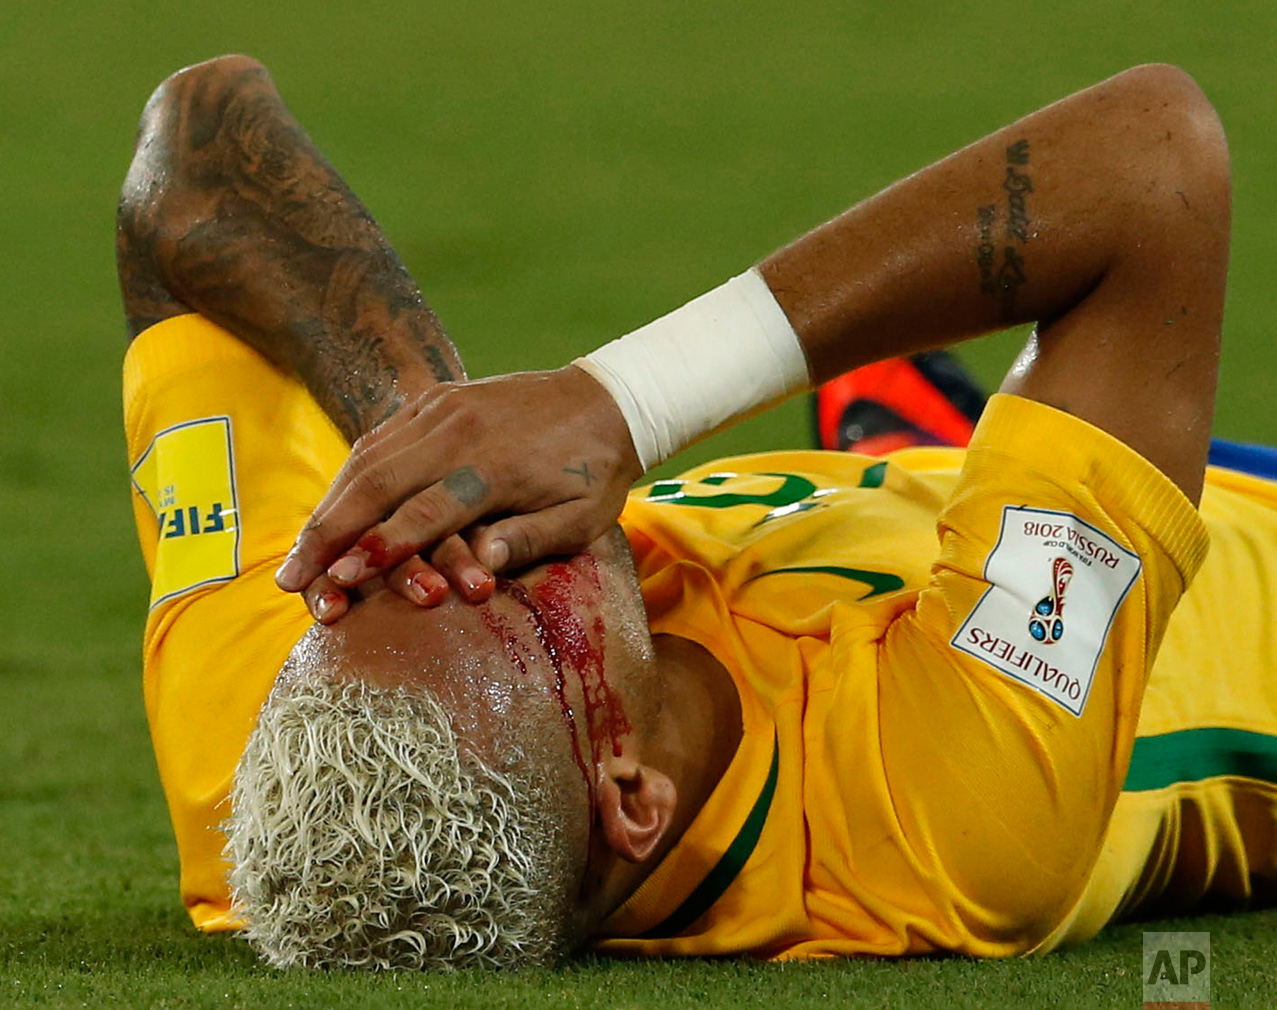  In this Thursday, Oct. 6, 2016 photo, Brazil's Neymar holds his bleeding face after a rough play during a 2018 World Cup qualifying soccer match against Bolivia in Natal, Brazil. Neymar sat on the bench the second half of the game. (AP Photo/Leo Cor